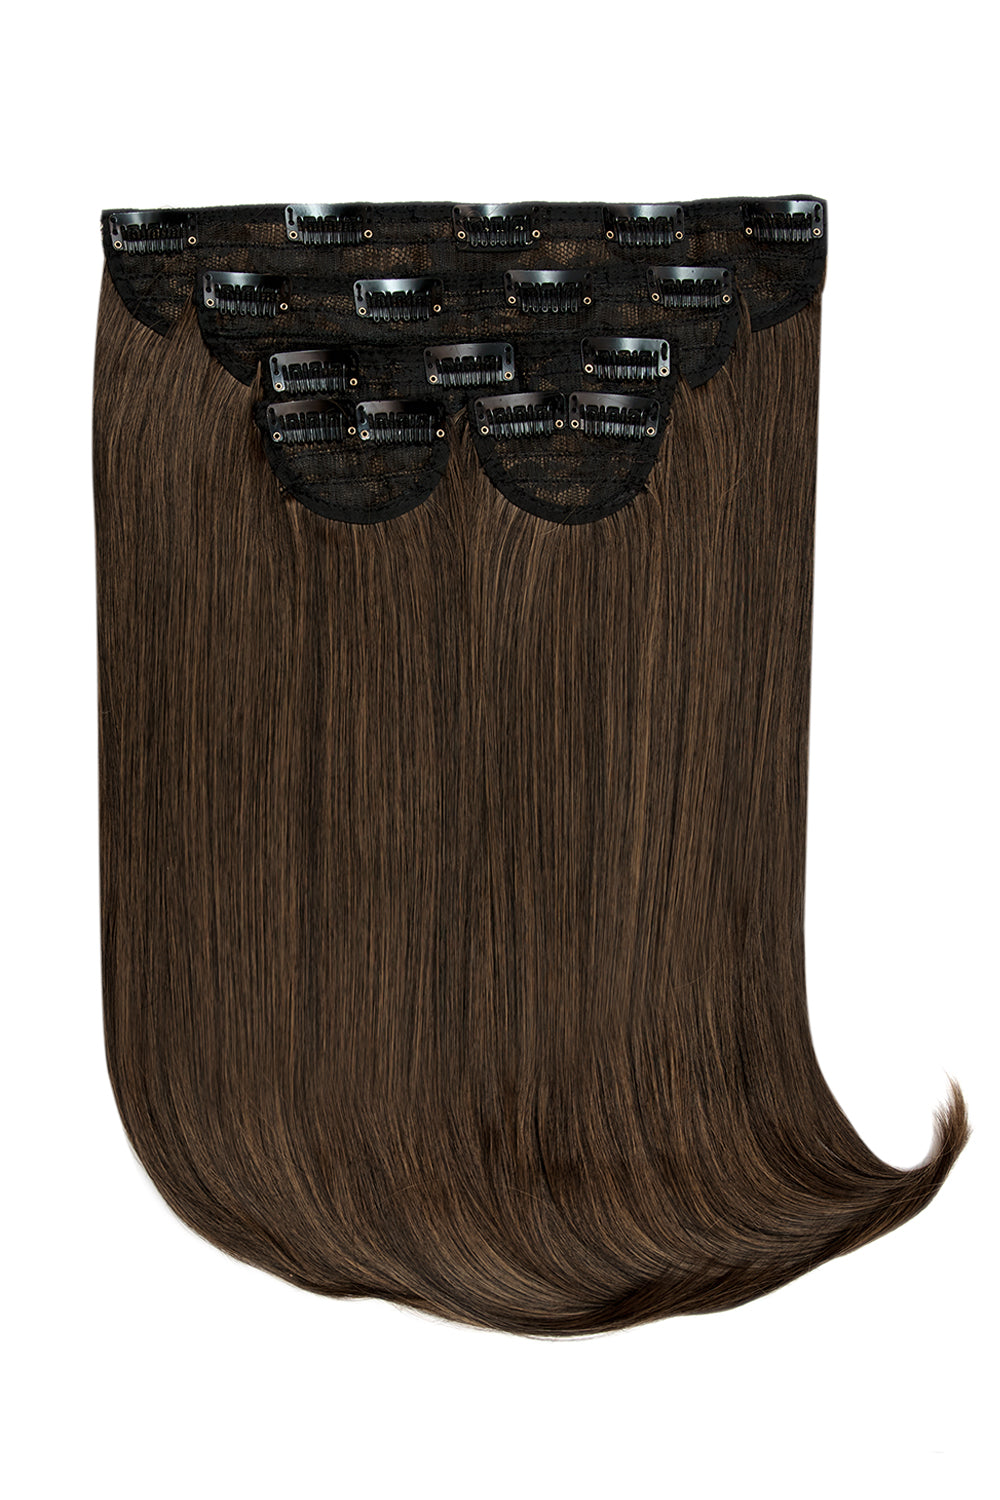 Super Thick 16" 5 Piece Curve Clip In Hair Extensions - Dark Brown & Caramel